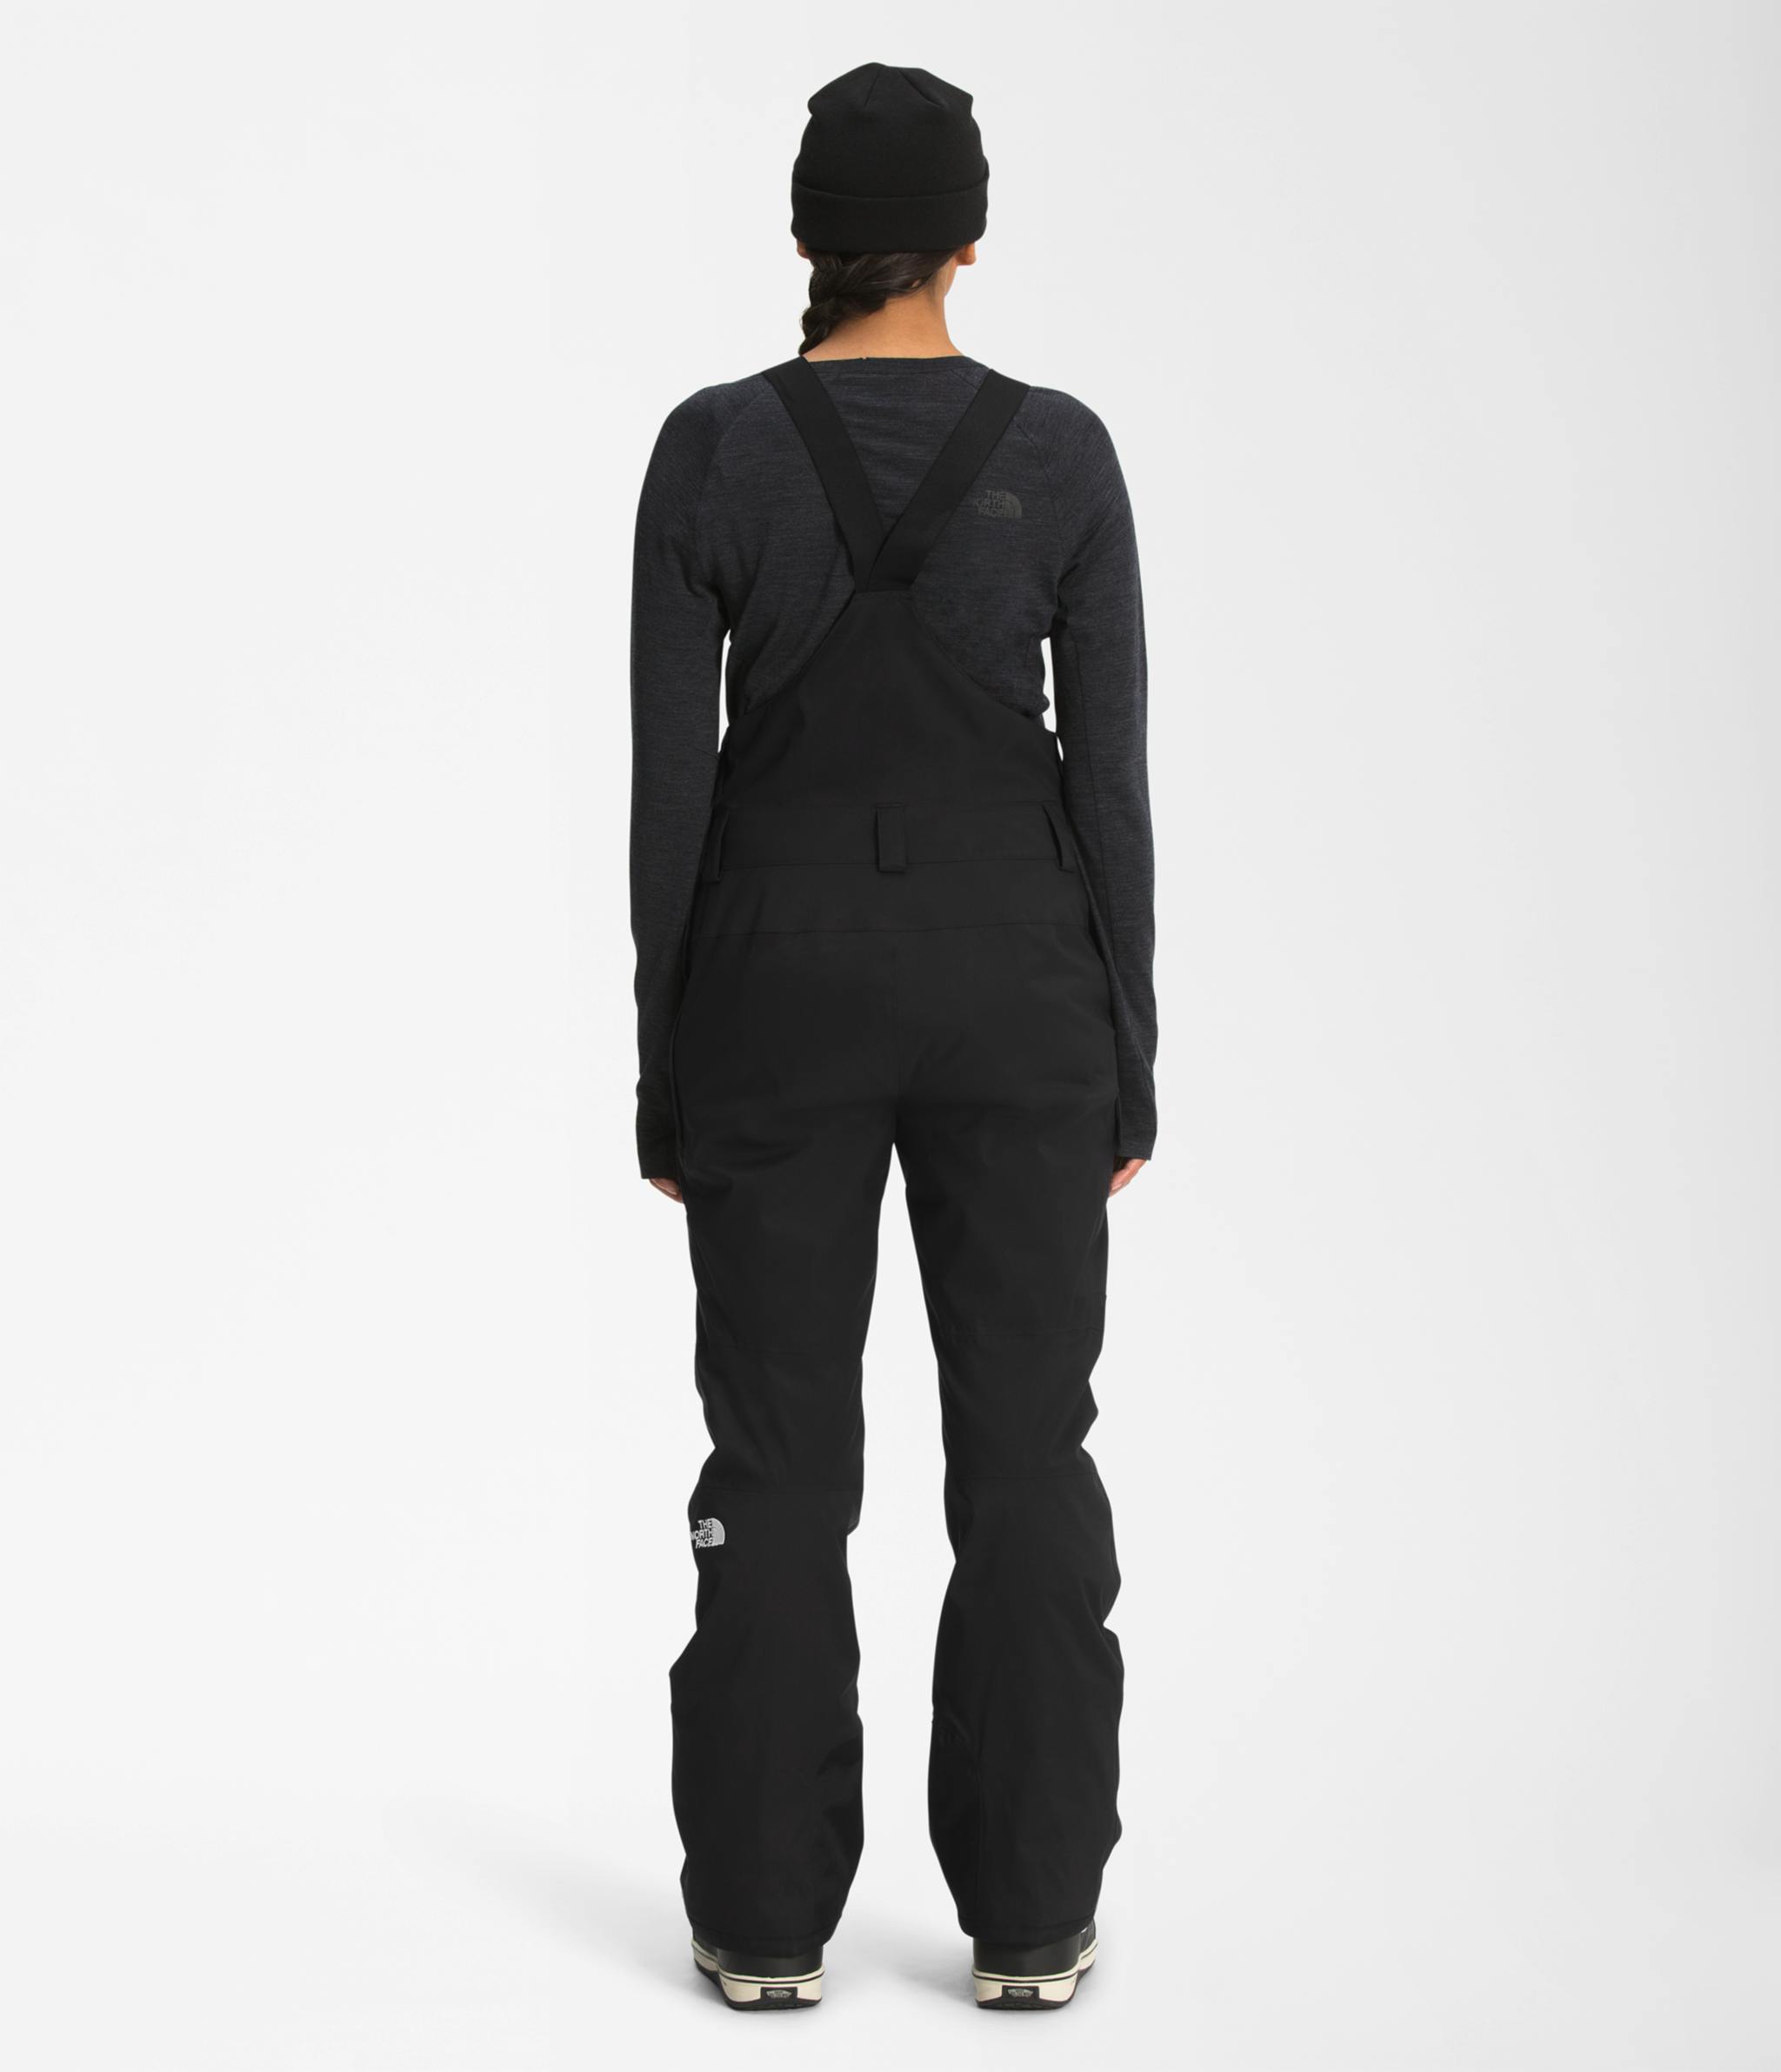 The North Face Women's Freedom Insulated Bib